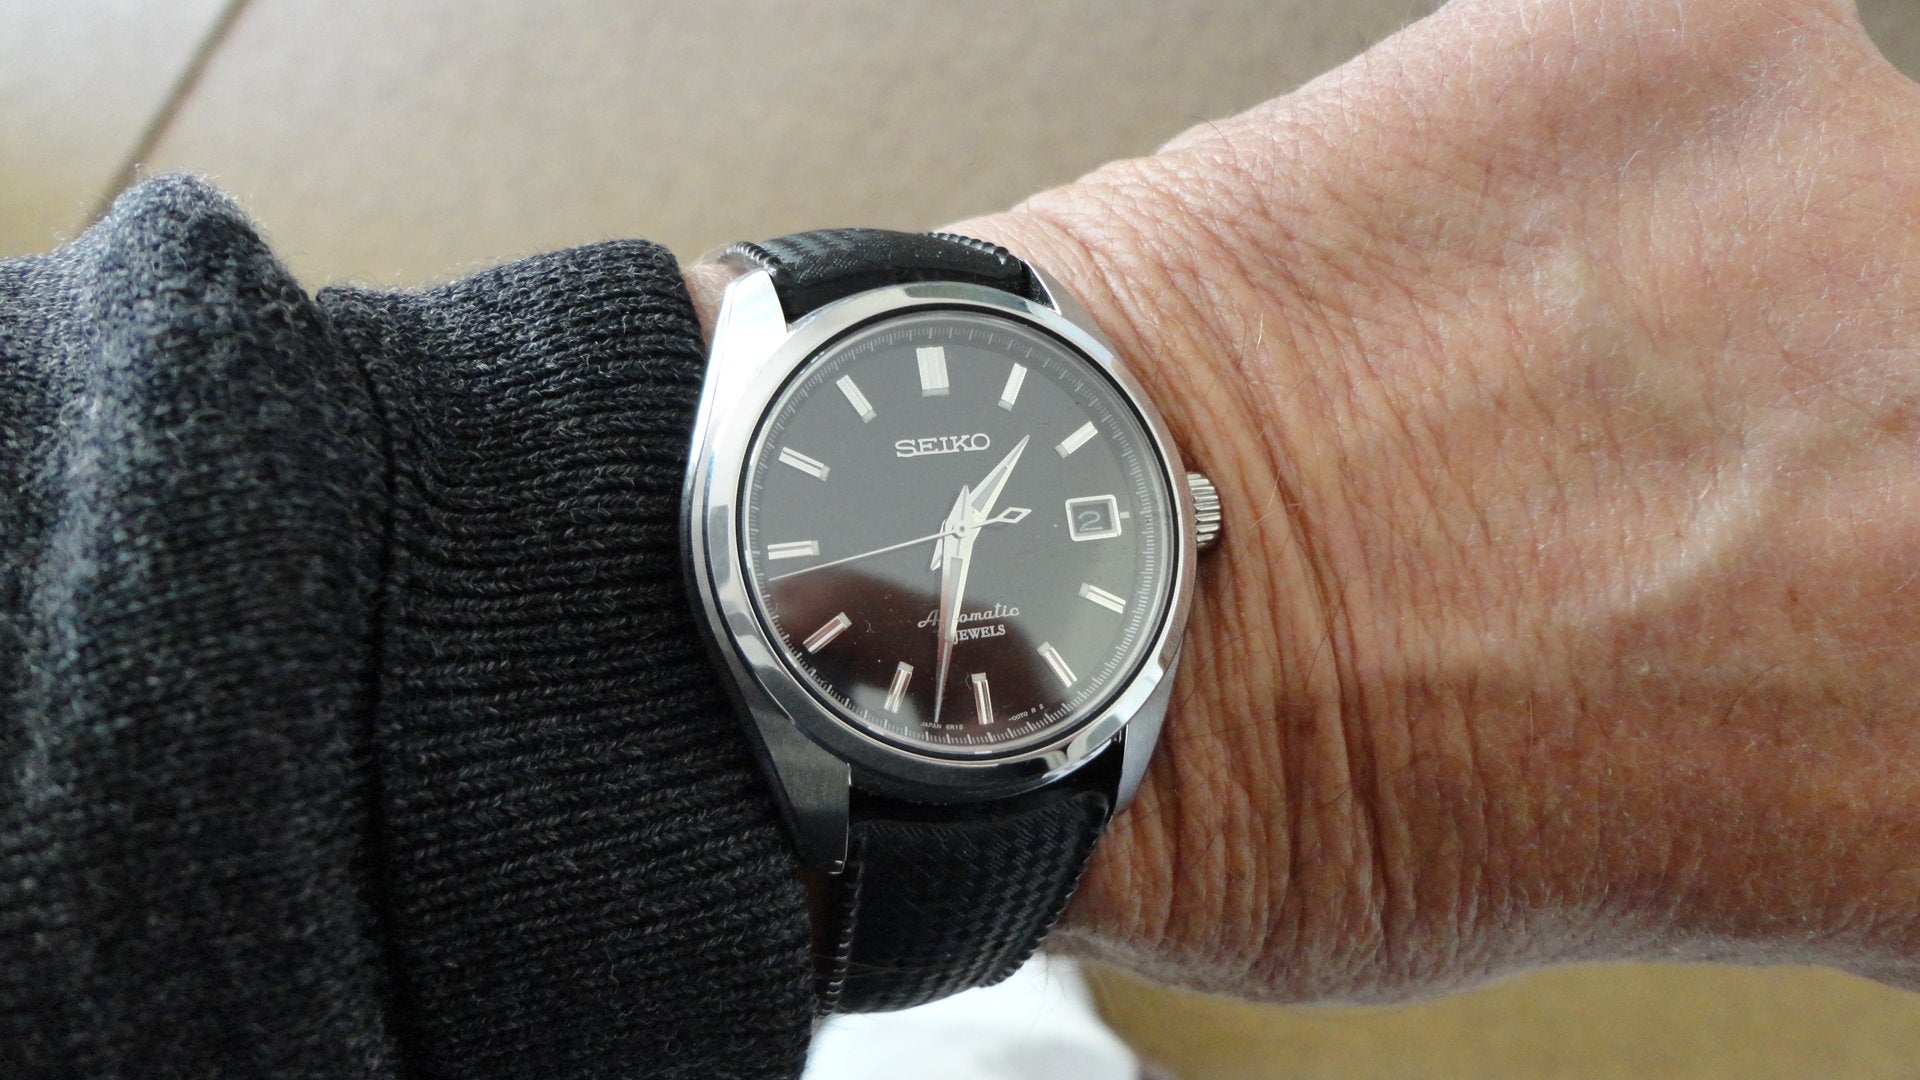 Seiko SARB033 as a casual/sport watch? | The Watch Site